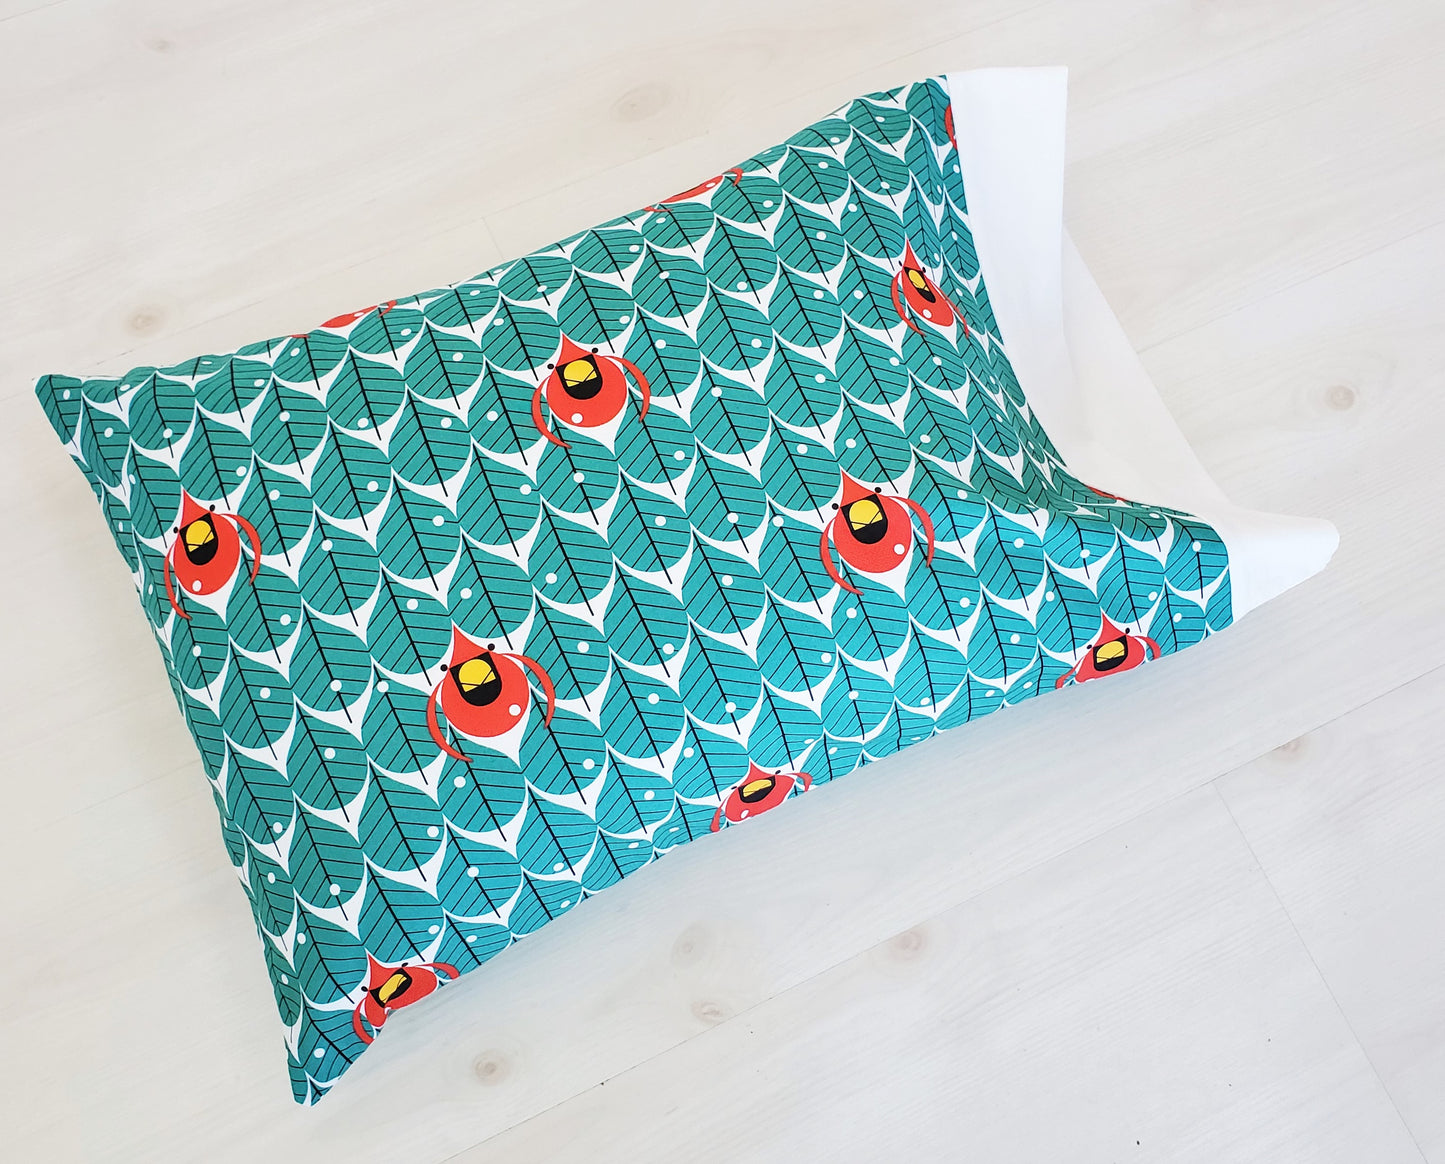 Charley Harper Holiday Pillowcases in Assorted Organic Cotton Prints